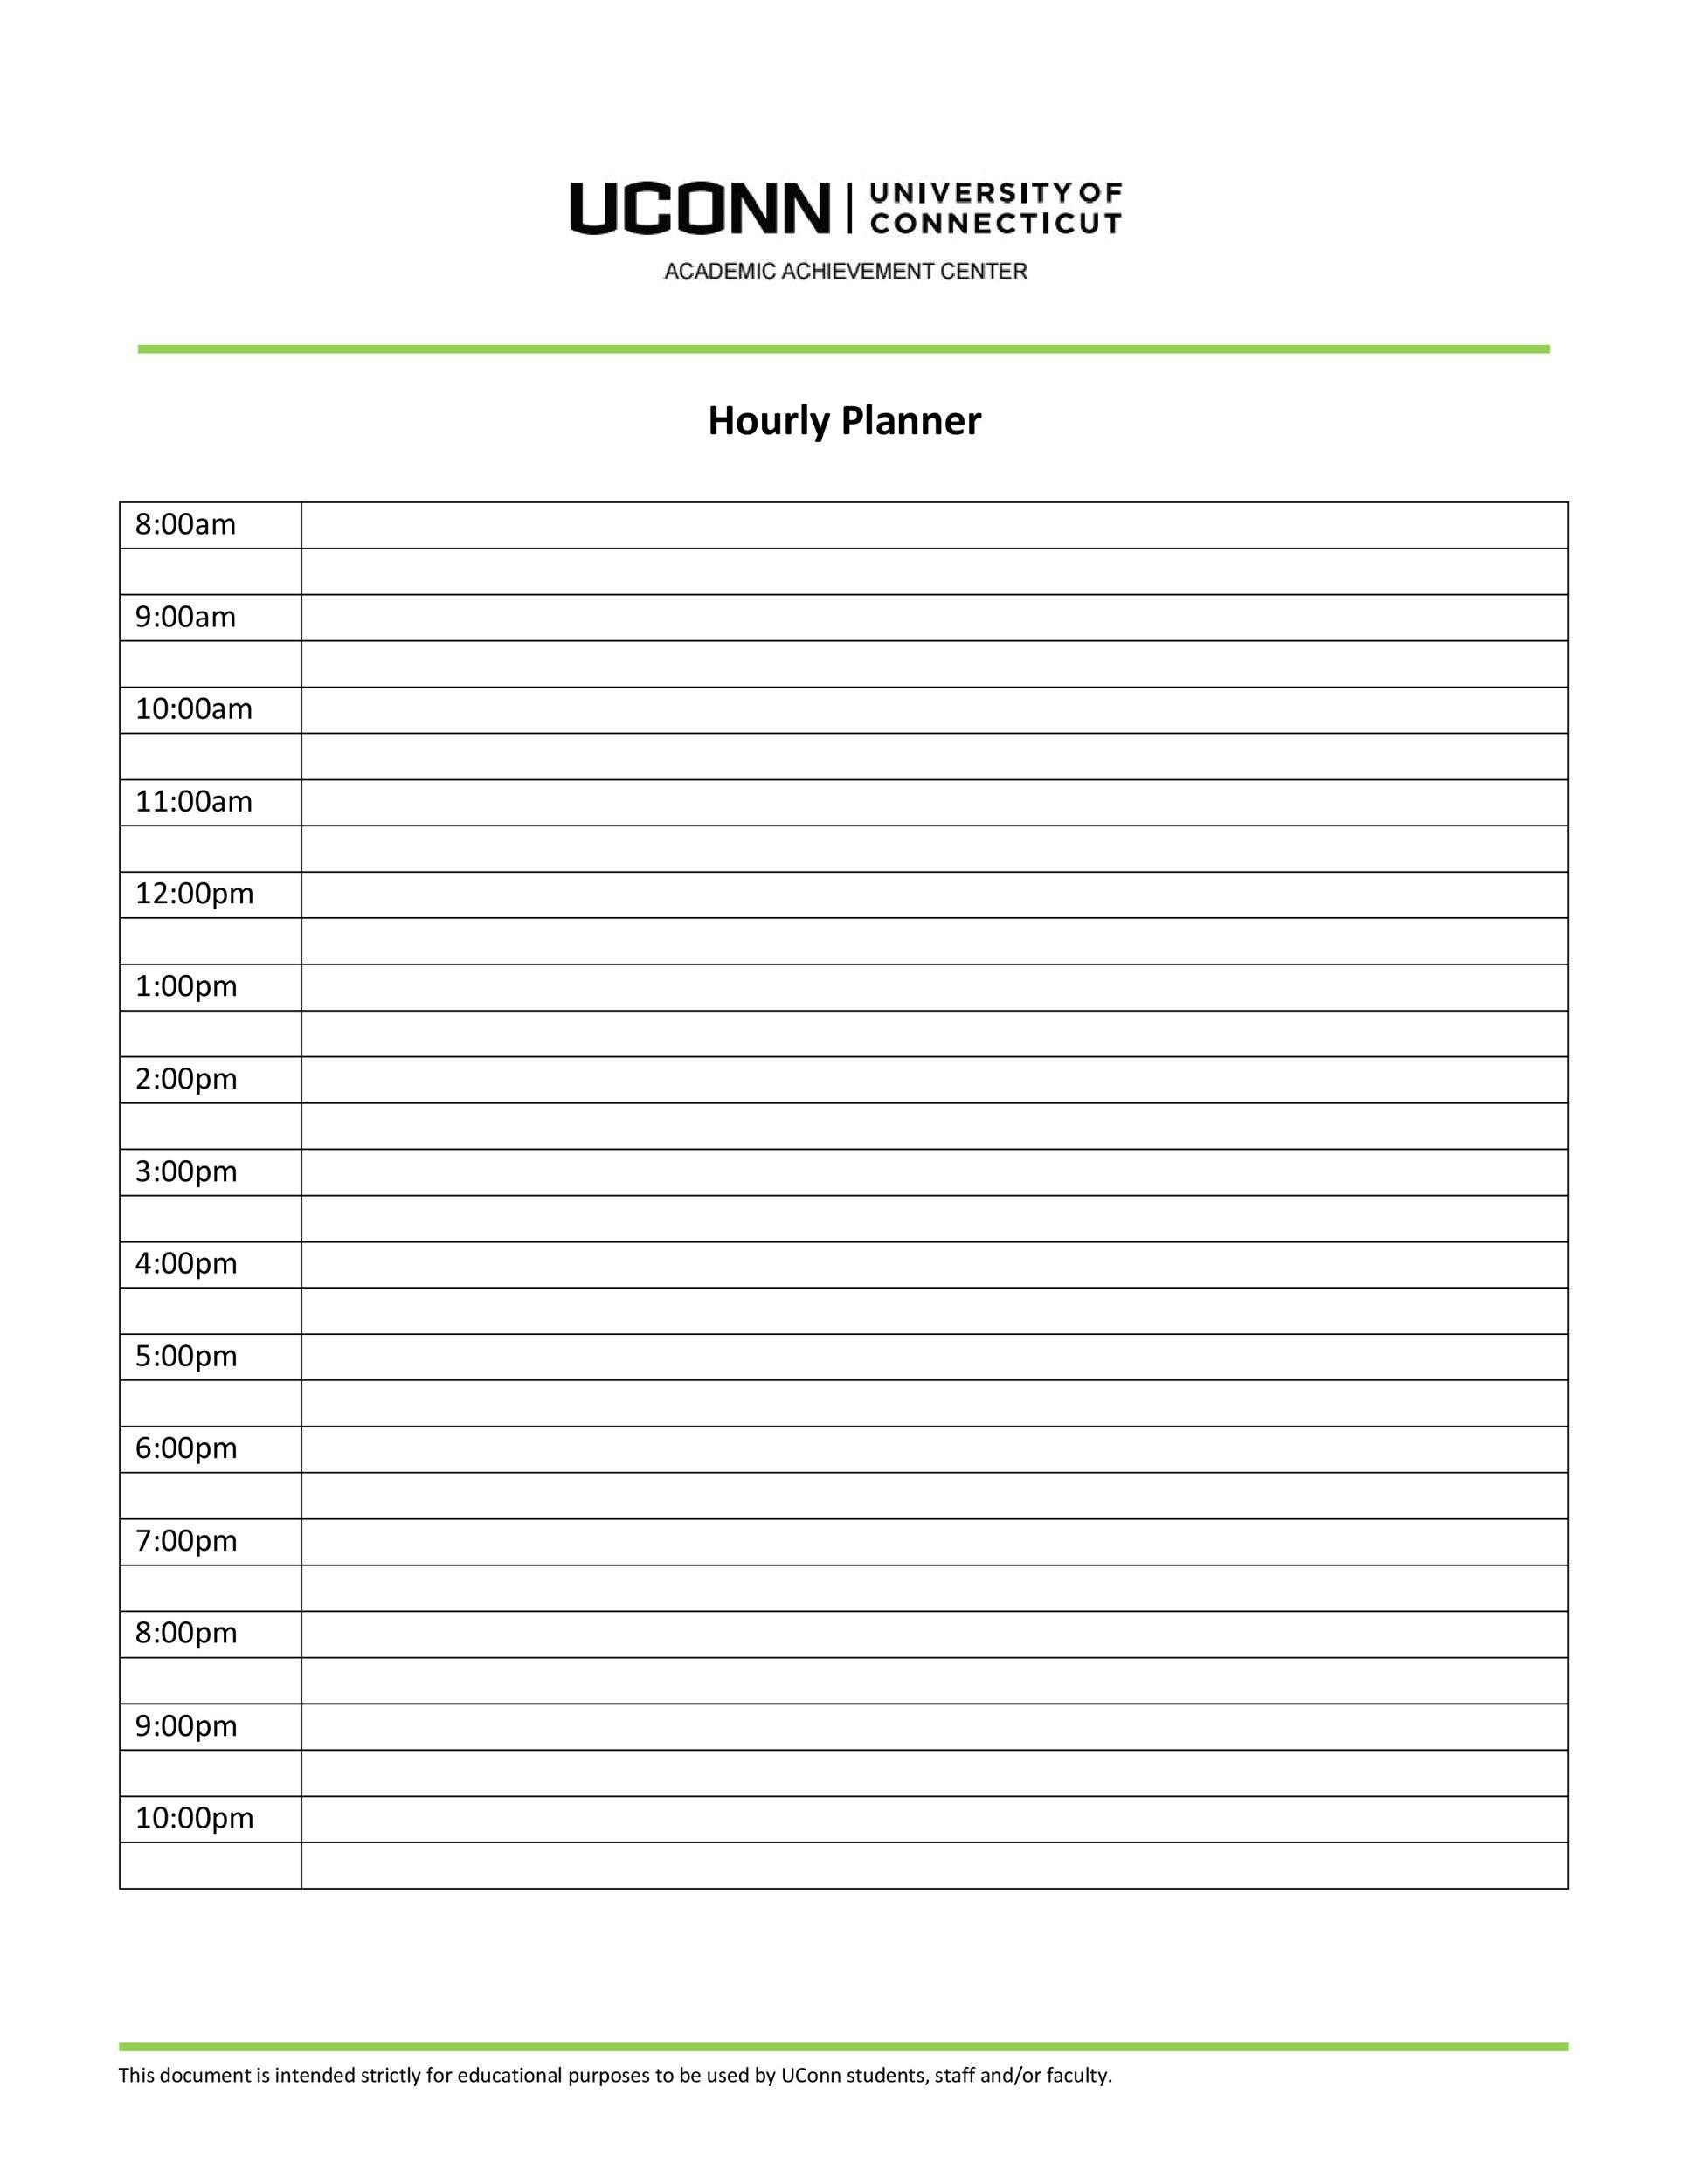 43-effective-hourly-schedule-templates-excel-ms-word-templatelab